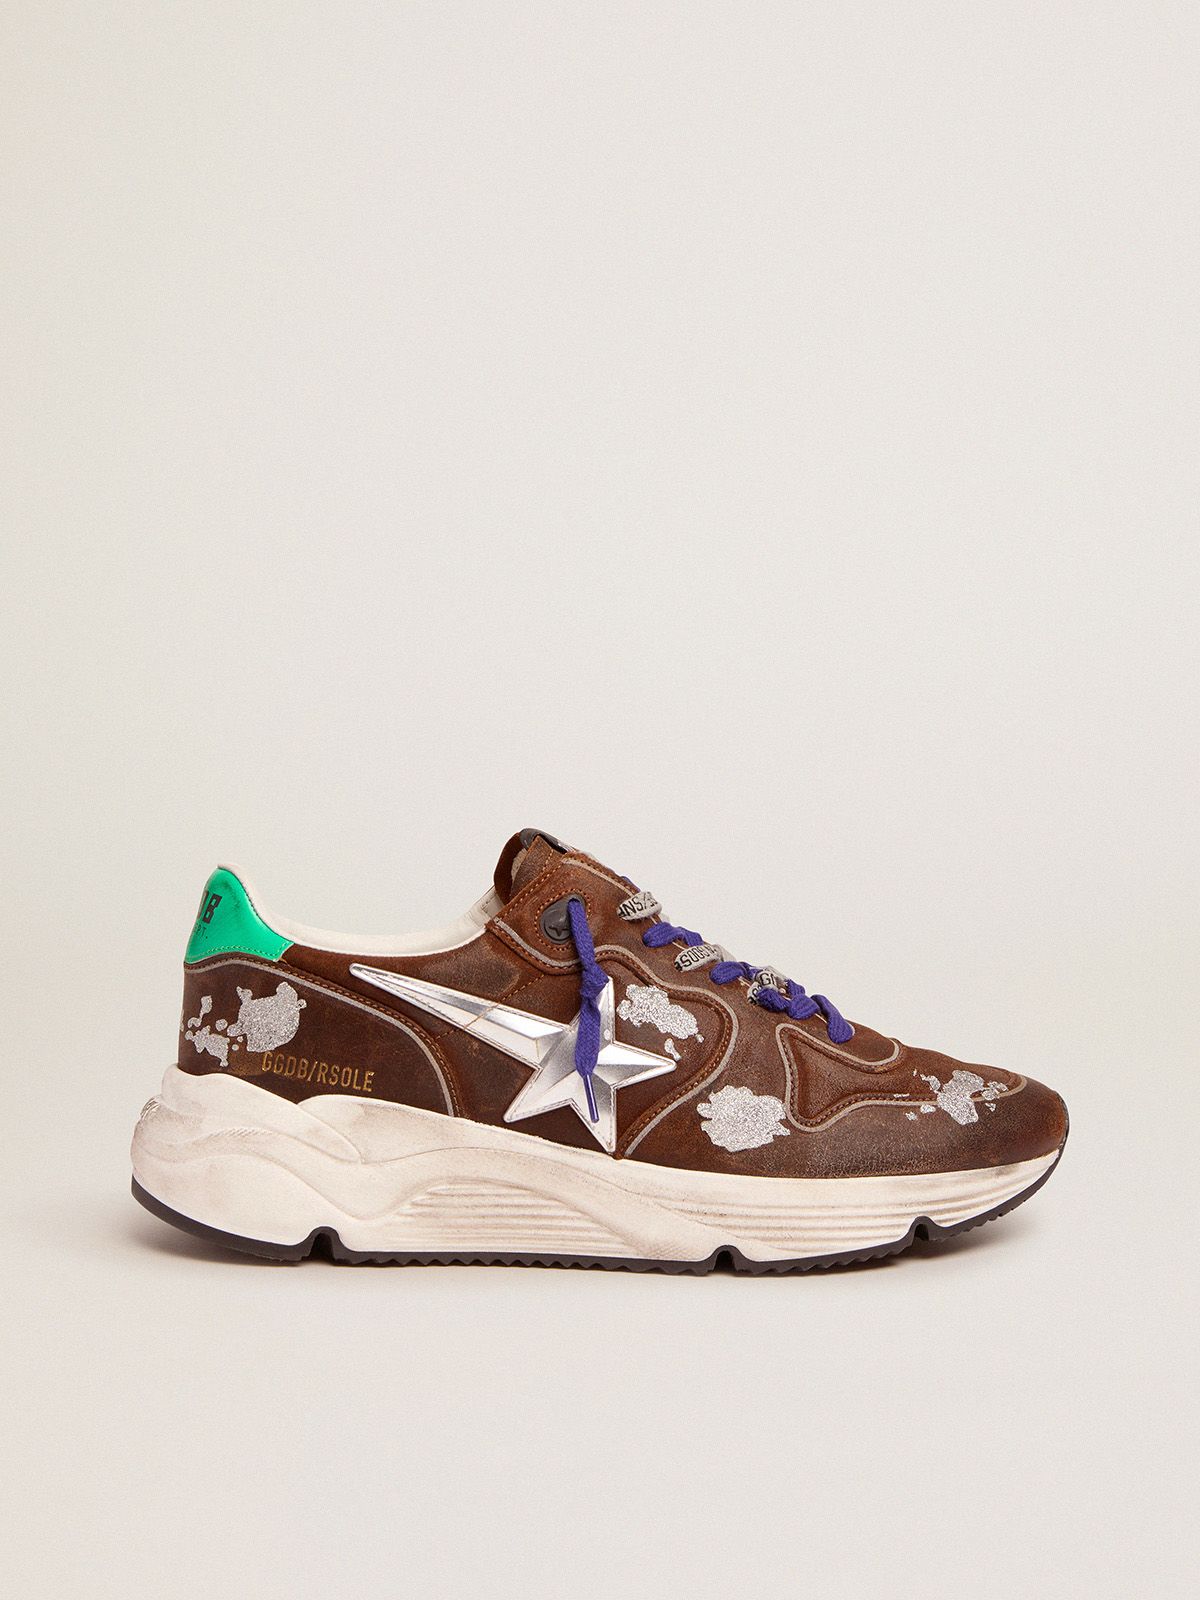 Superstar Ggdb Running Sole sneakers in cognac-colored suede with 3D star